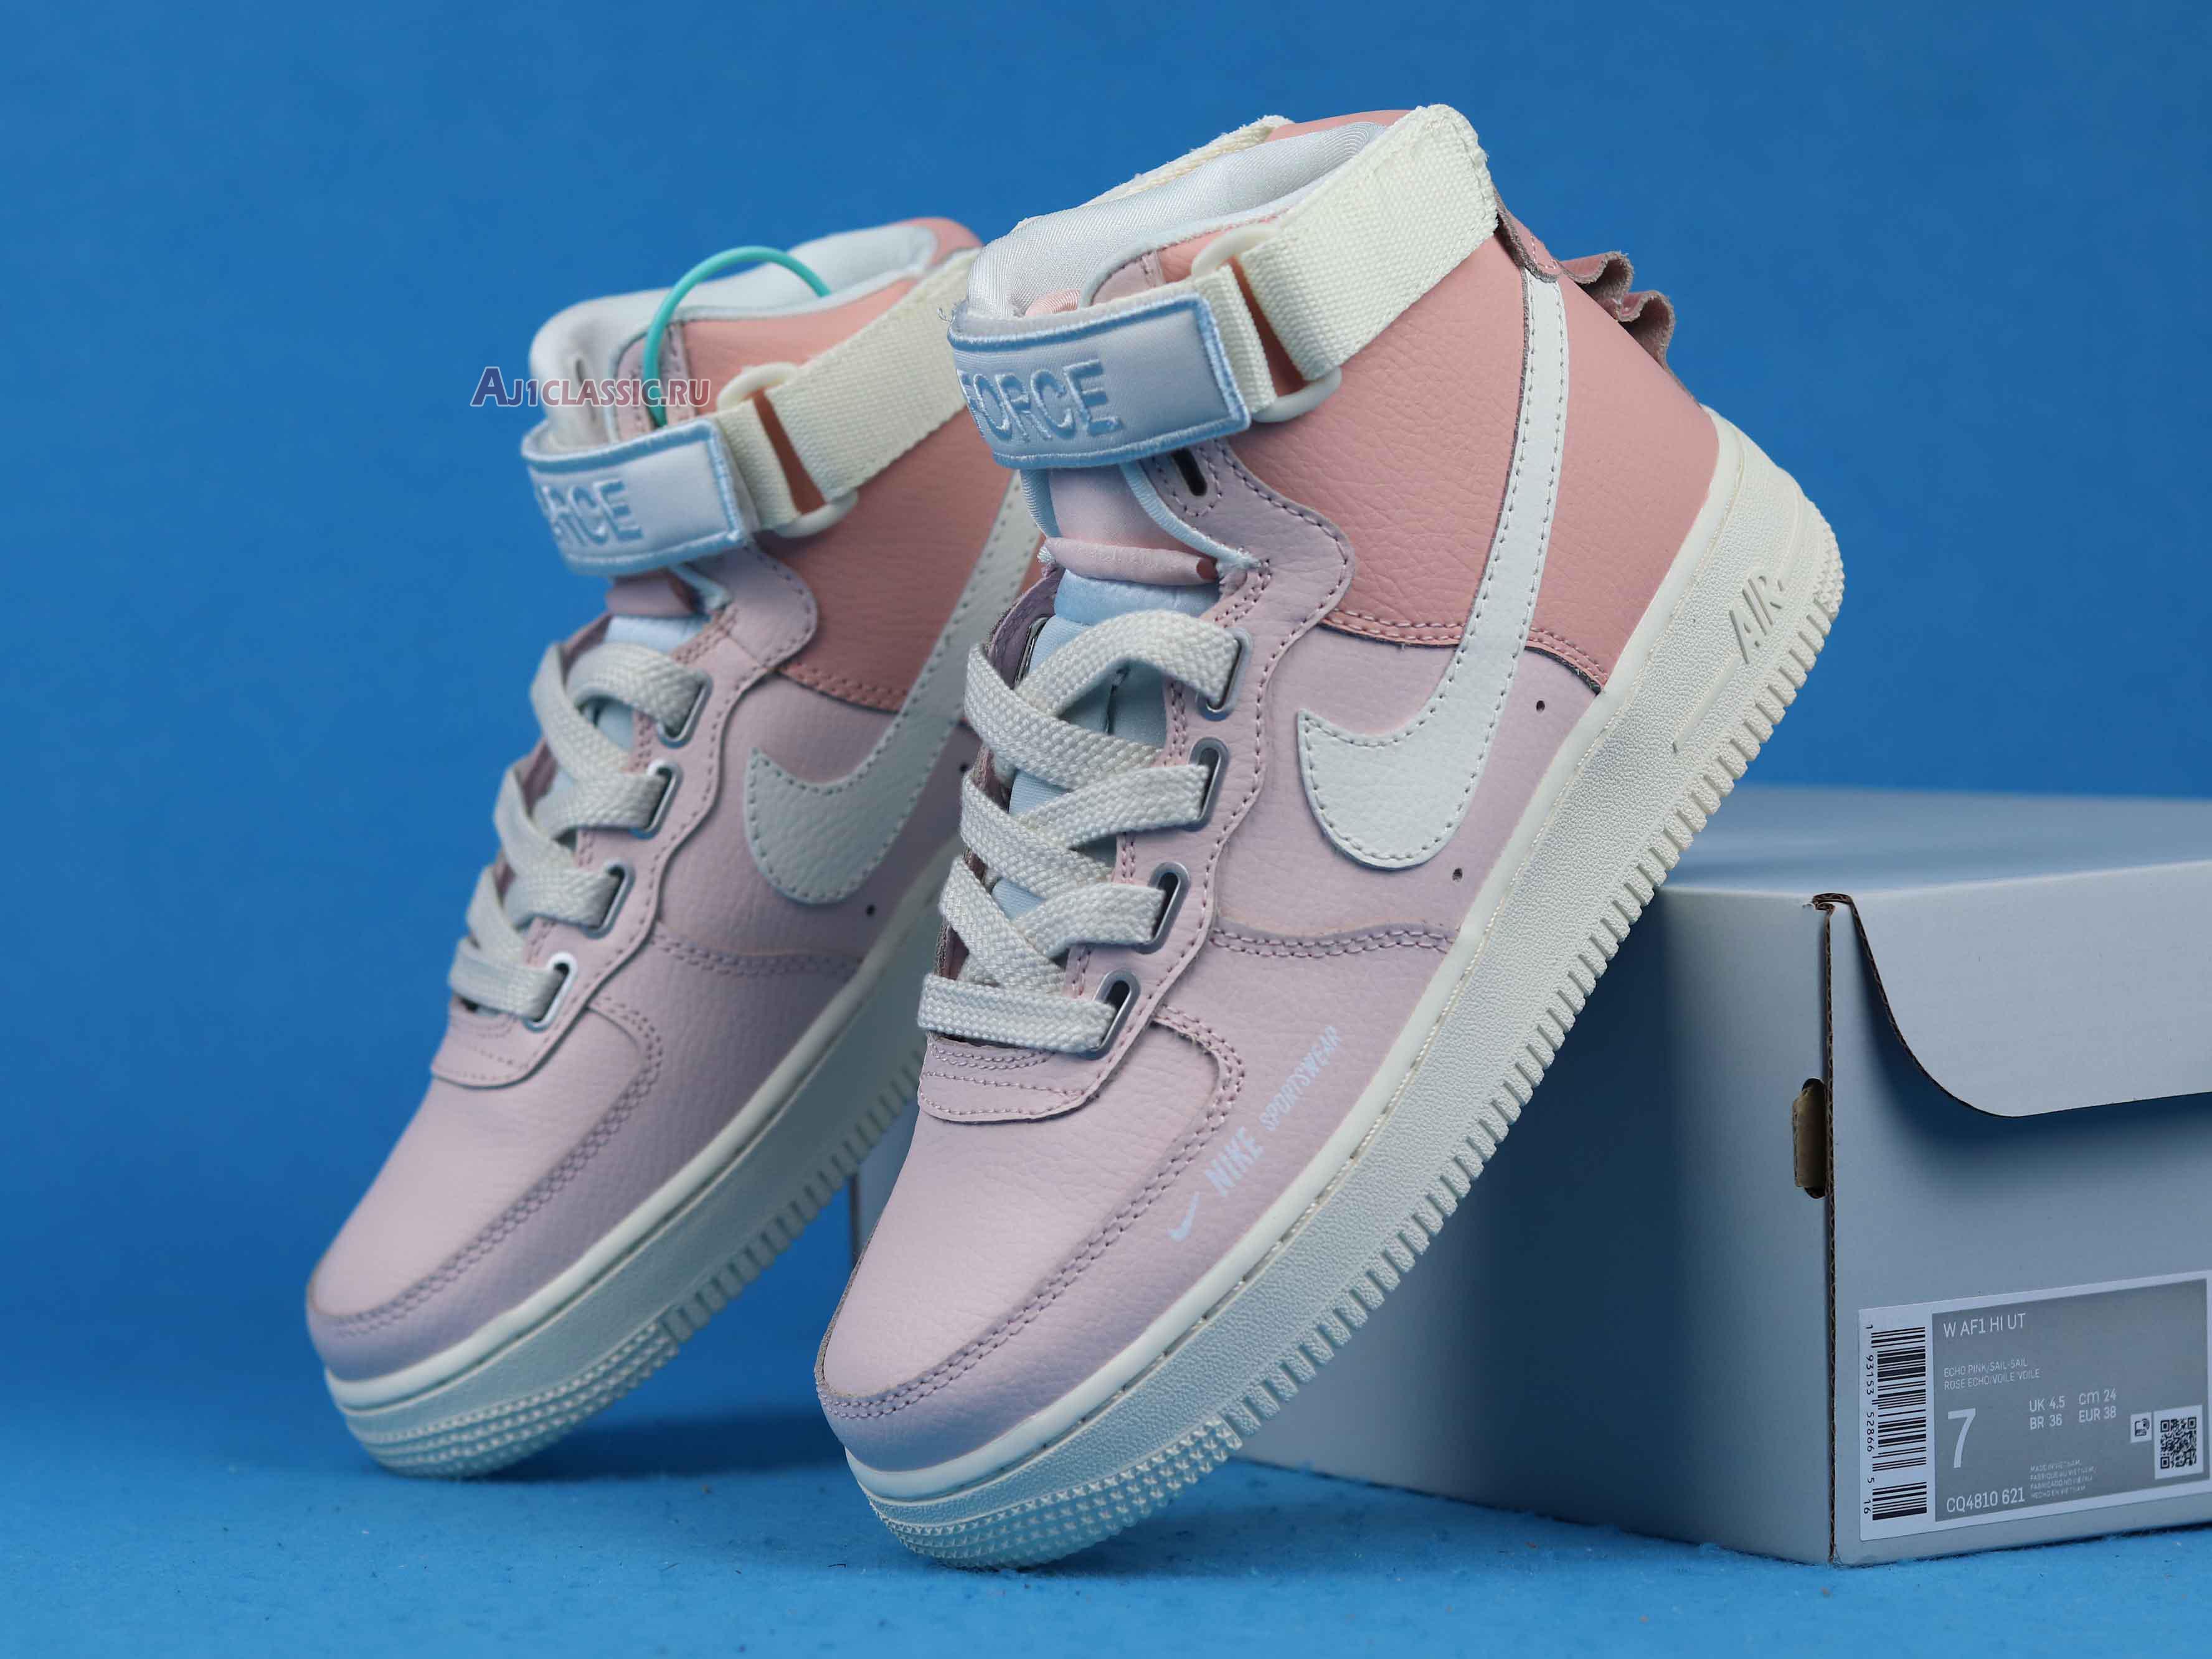 Nike Wmns Air Force 1 High Utility Force is Female CQ4810-621 Echo Pink/Sail Sneakers